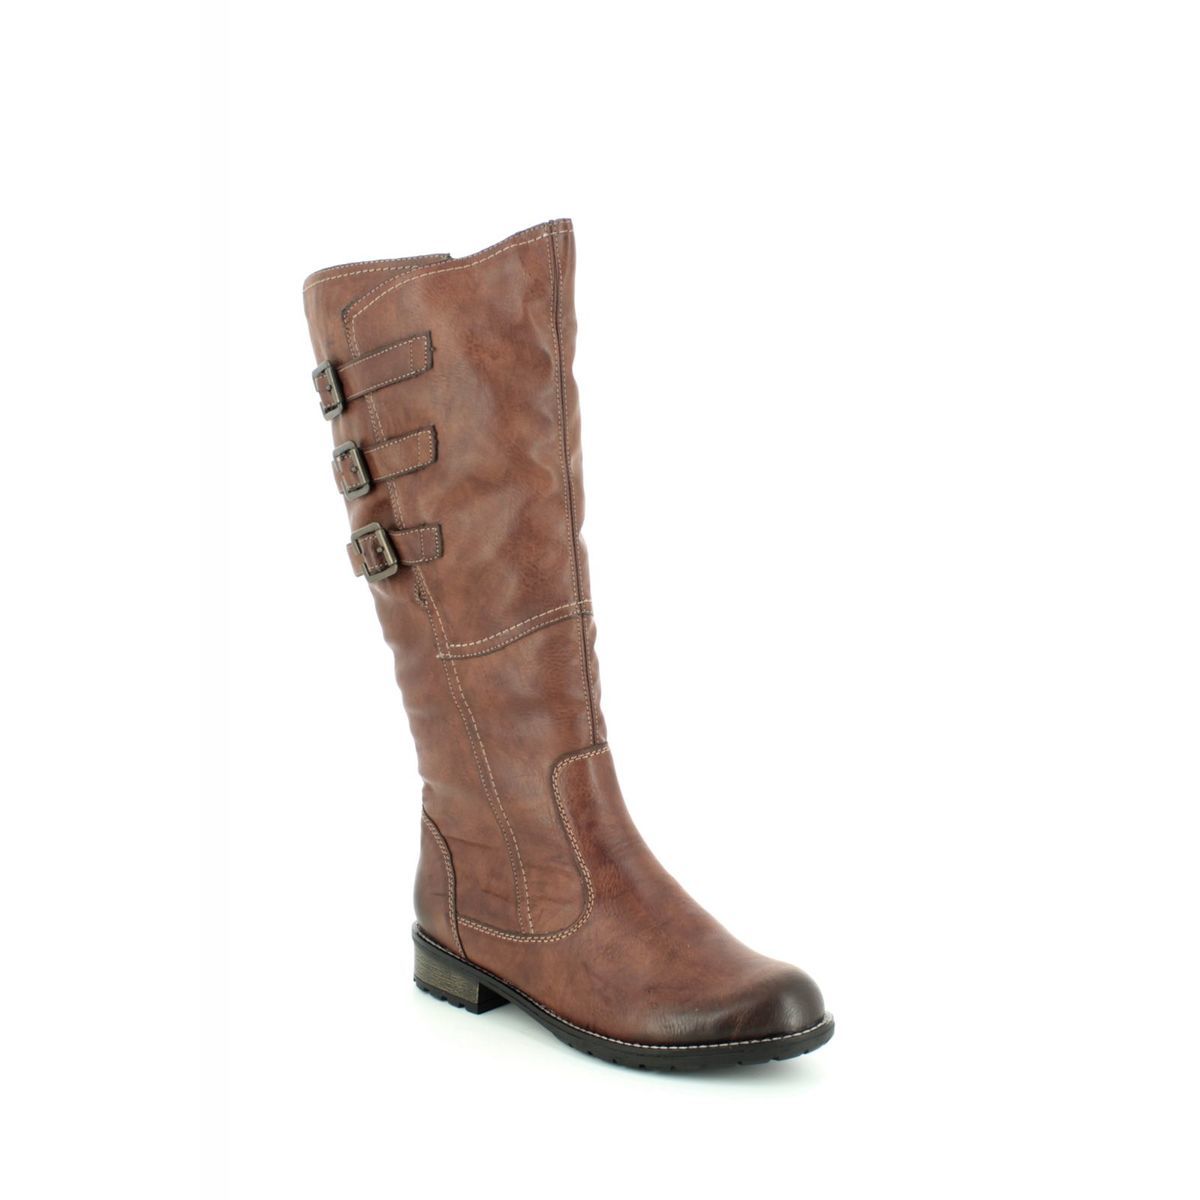 Remonte Shebuc Wide Calf Tan Womens Knee-High Boots R3370-22 In Size 40 In Plain Tan